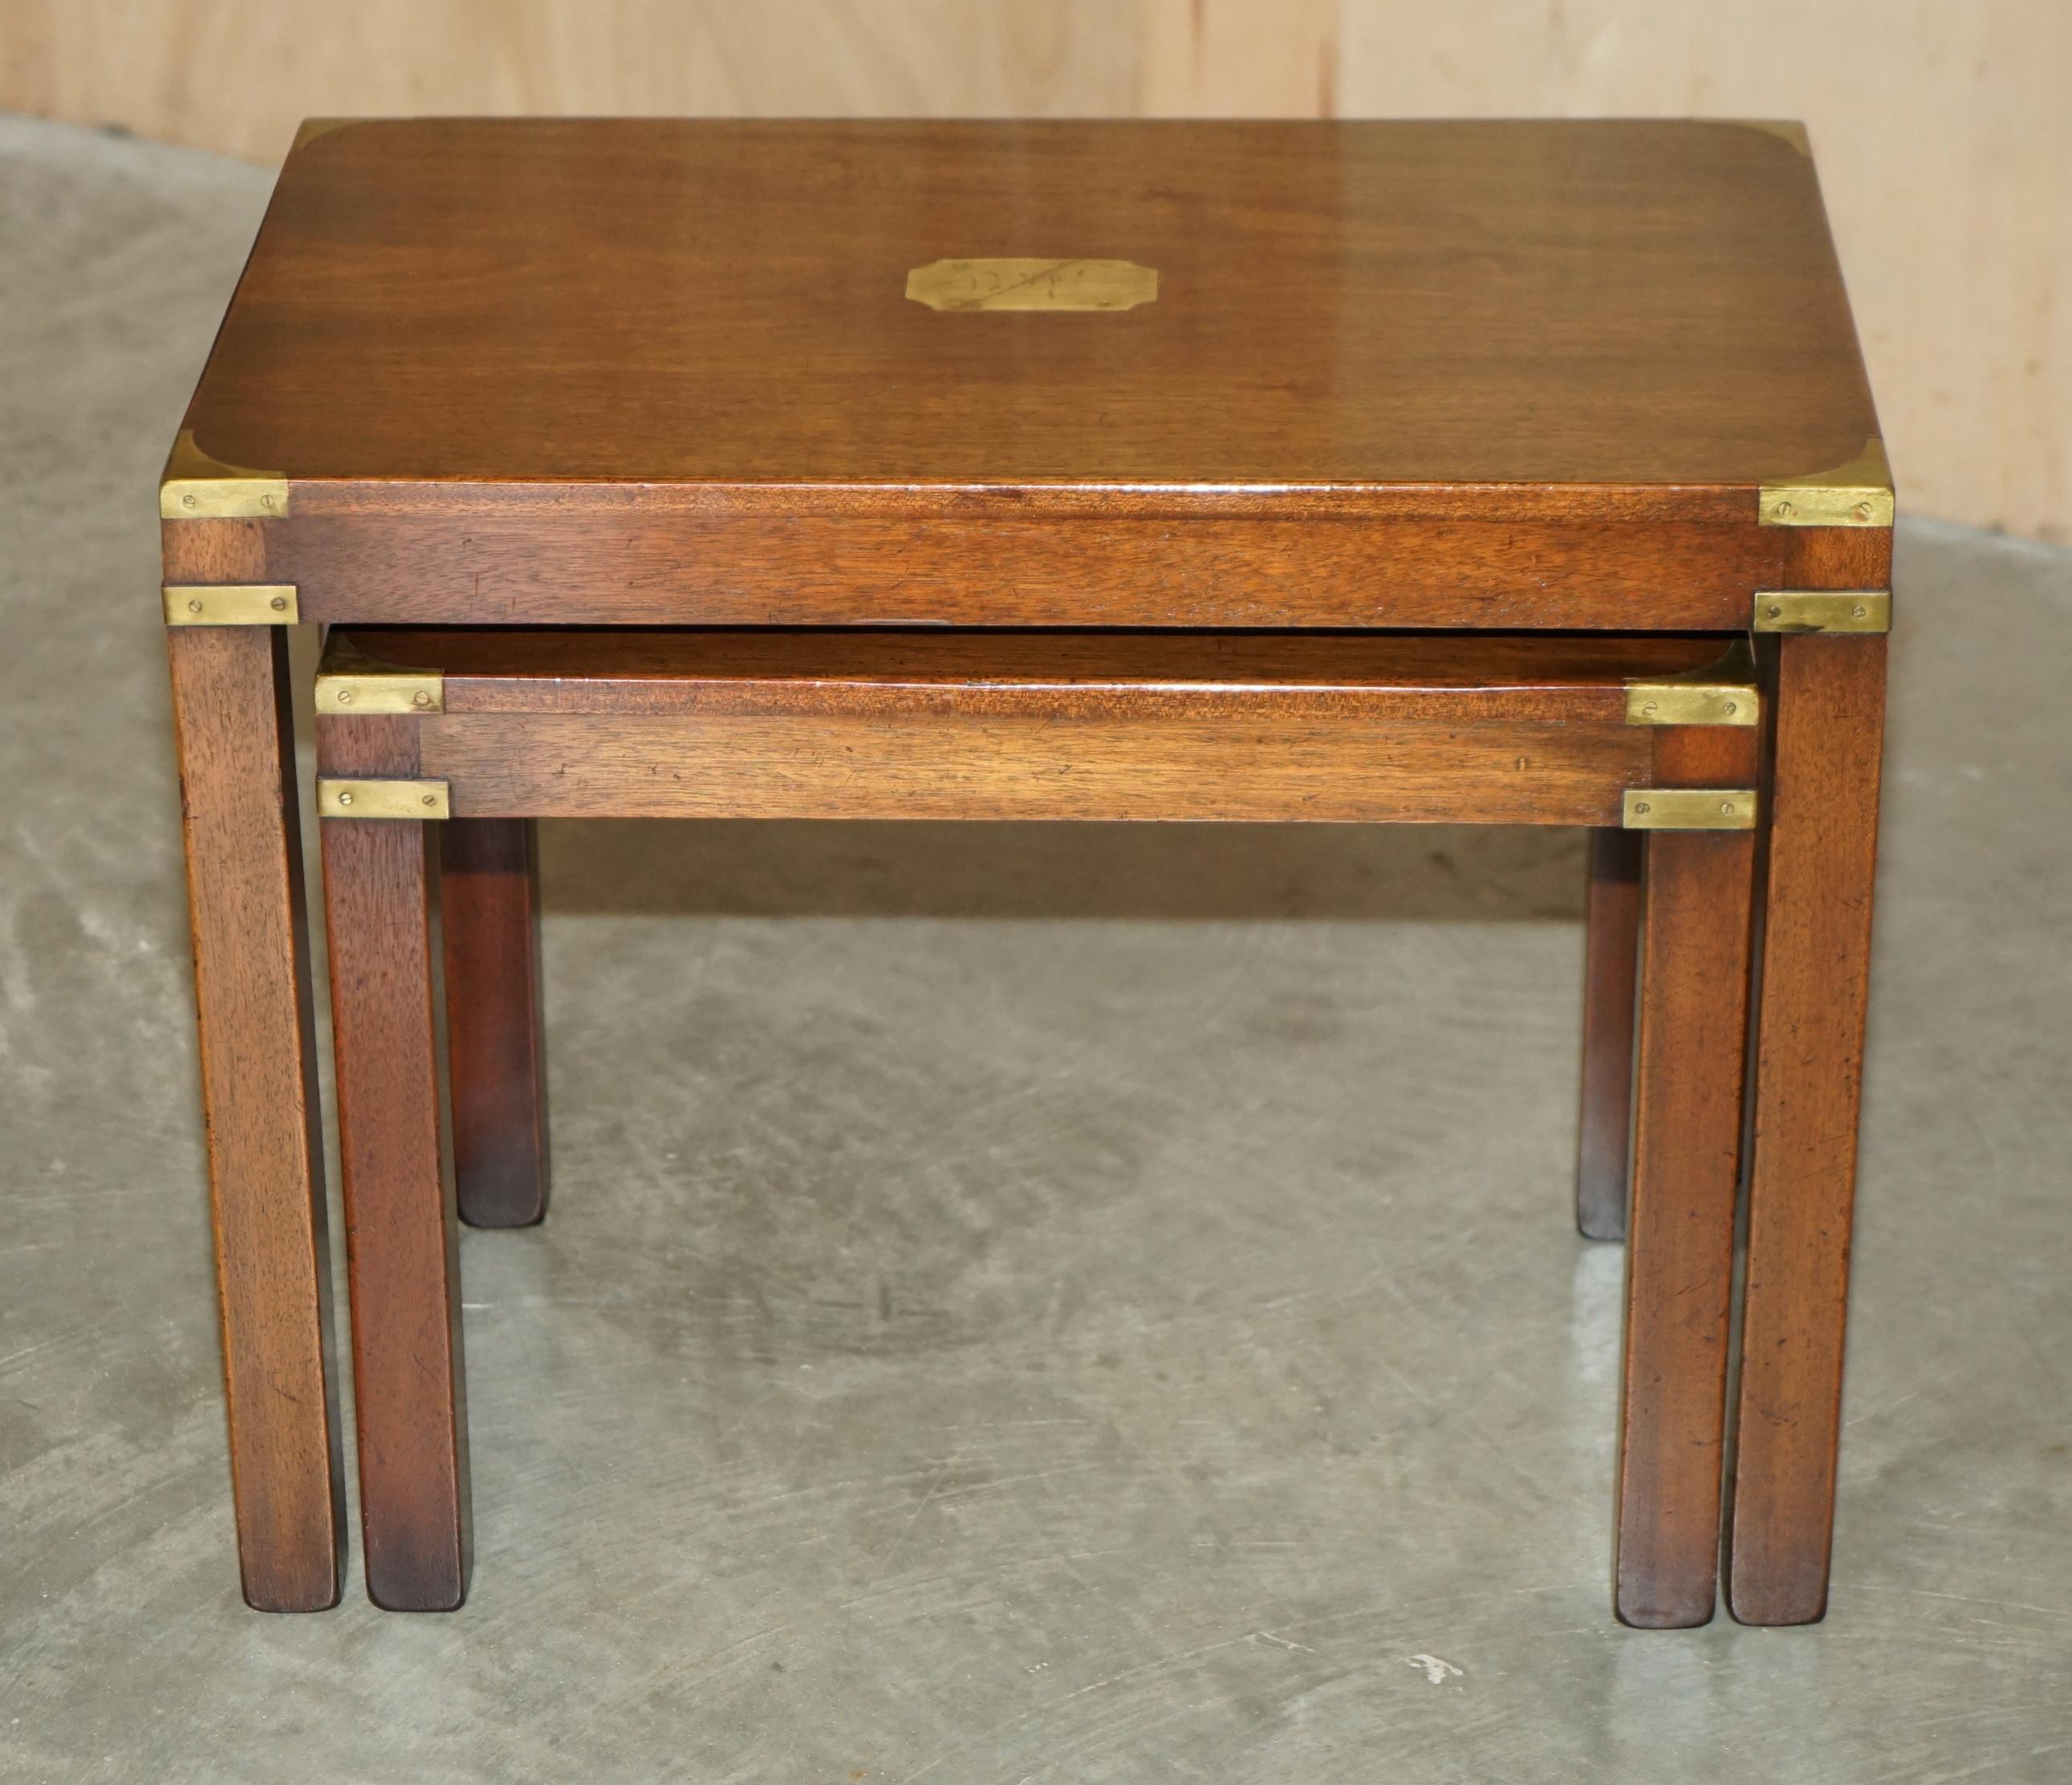 RESTORED HARRODS KENNEDY COFFEE & SiDE TABLE NEST OF TABLES MILITARY CAMPAIGN (Englisch) im Angebot